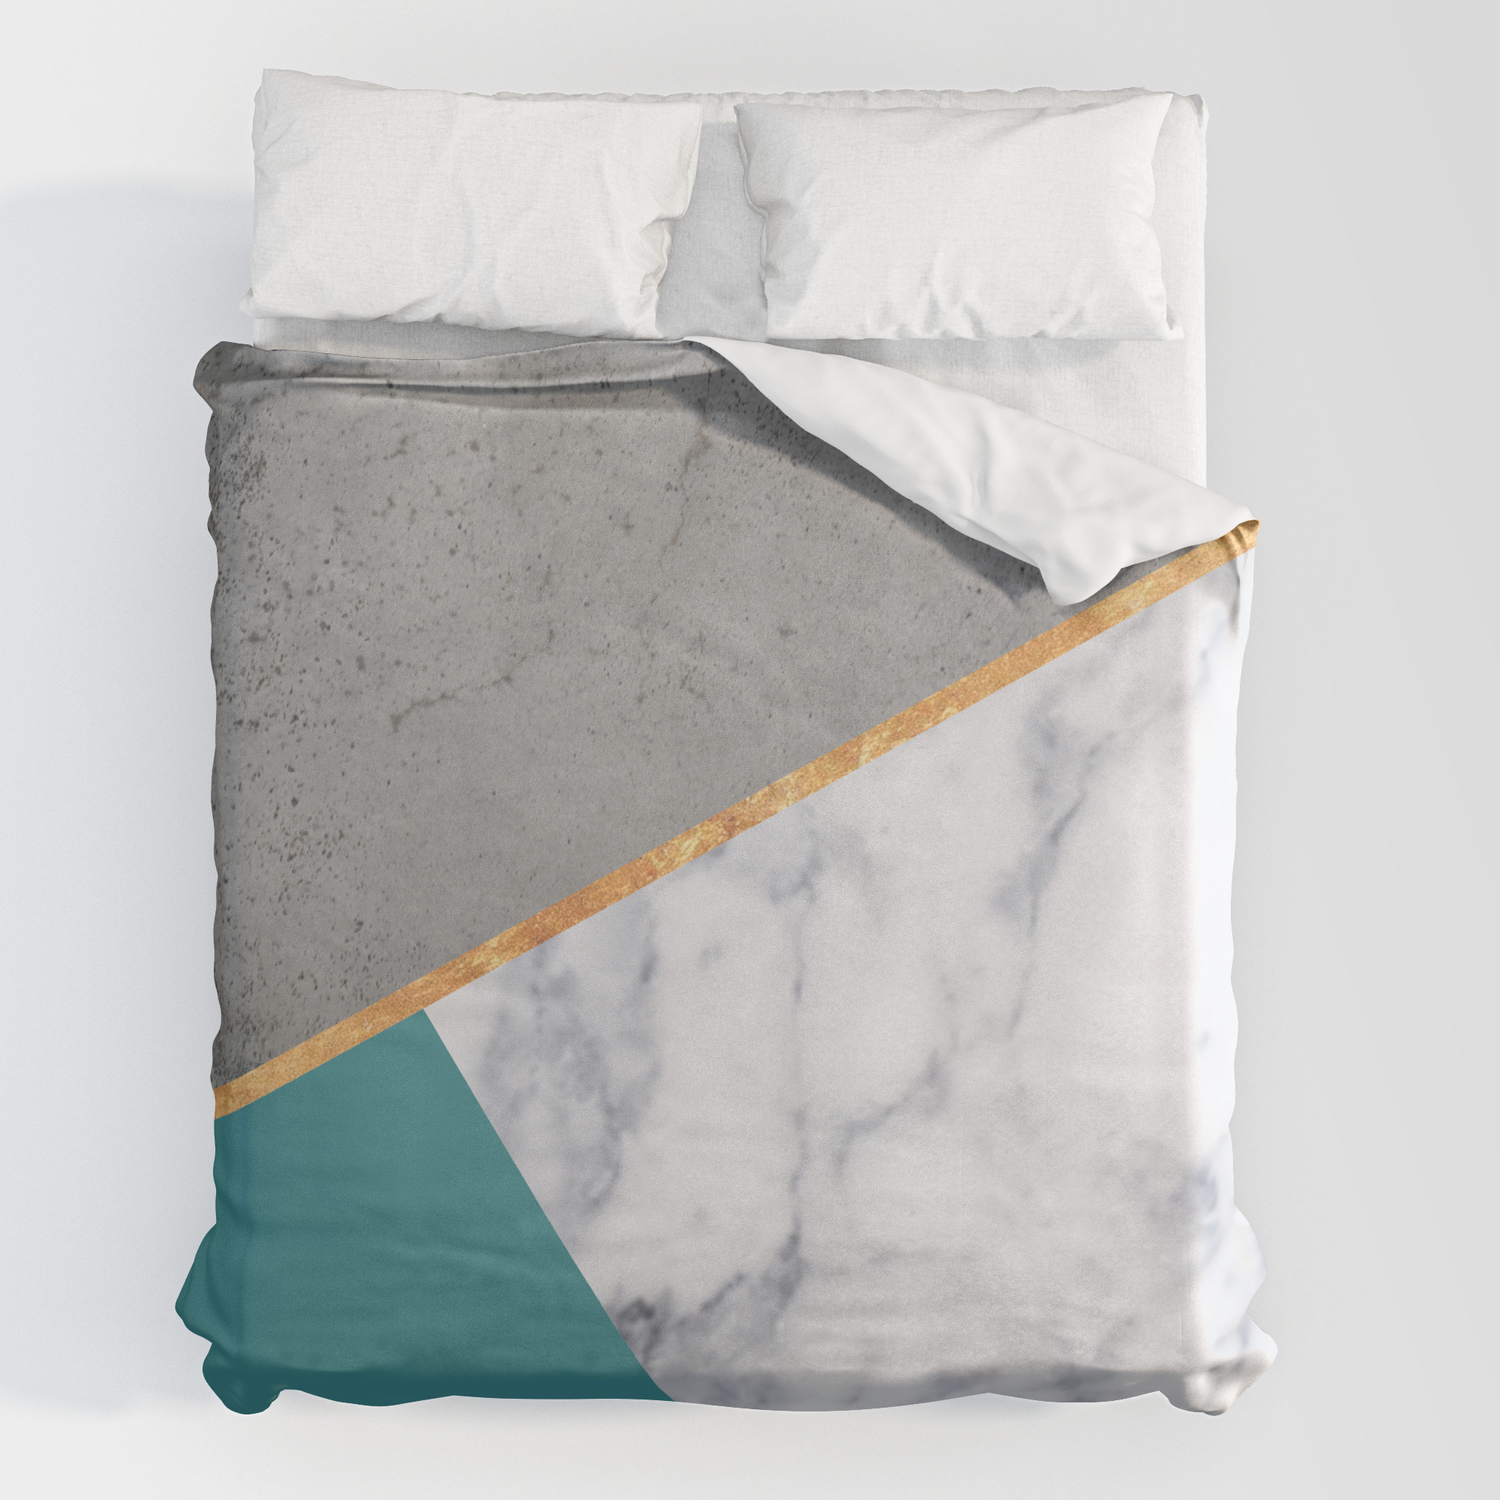 Society6 Marble Teal Gold Gray Geometric by Xiari on Rectangular Pillow X-Large 28 x 20 